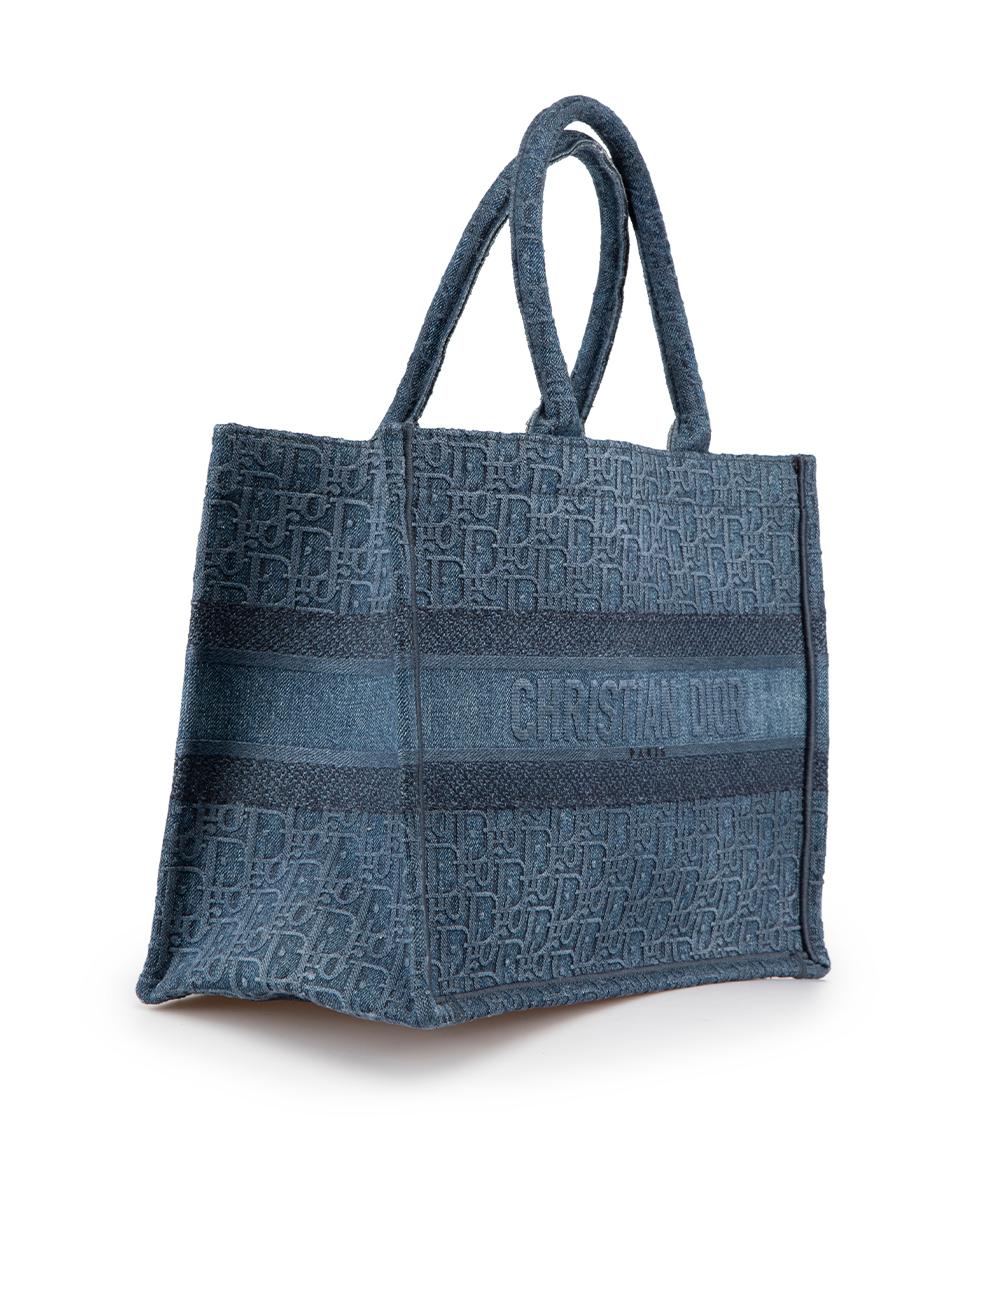 CONDITION is Very good. Minimal wear to bag is evident. Minimal wear to fabric surface with one or two negligible frayed thread ends on this used Dior designer resale item.
 
Details
Book tote 
Blue
Denim
Medium tote bag
2x Rolled top